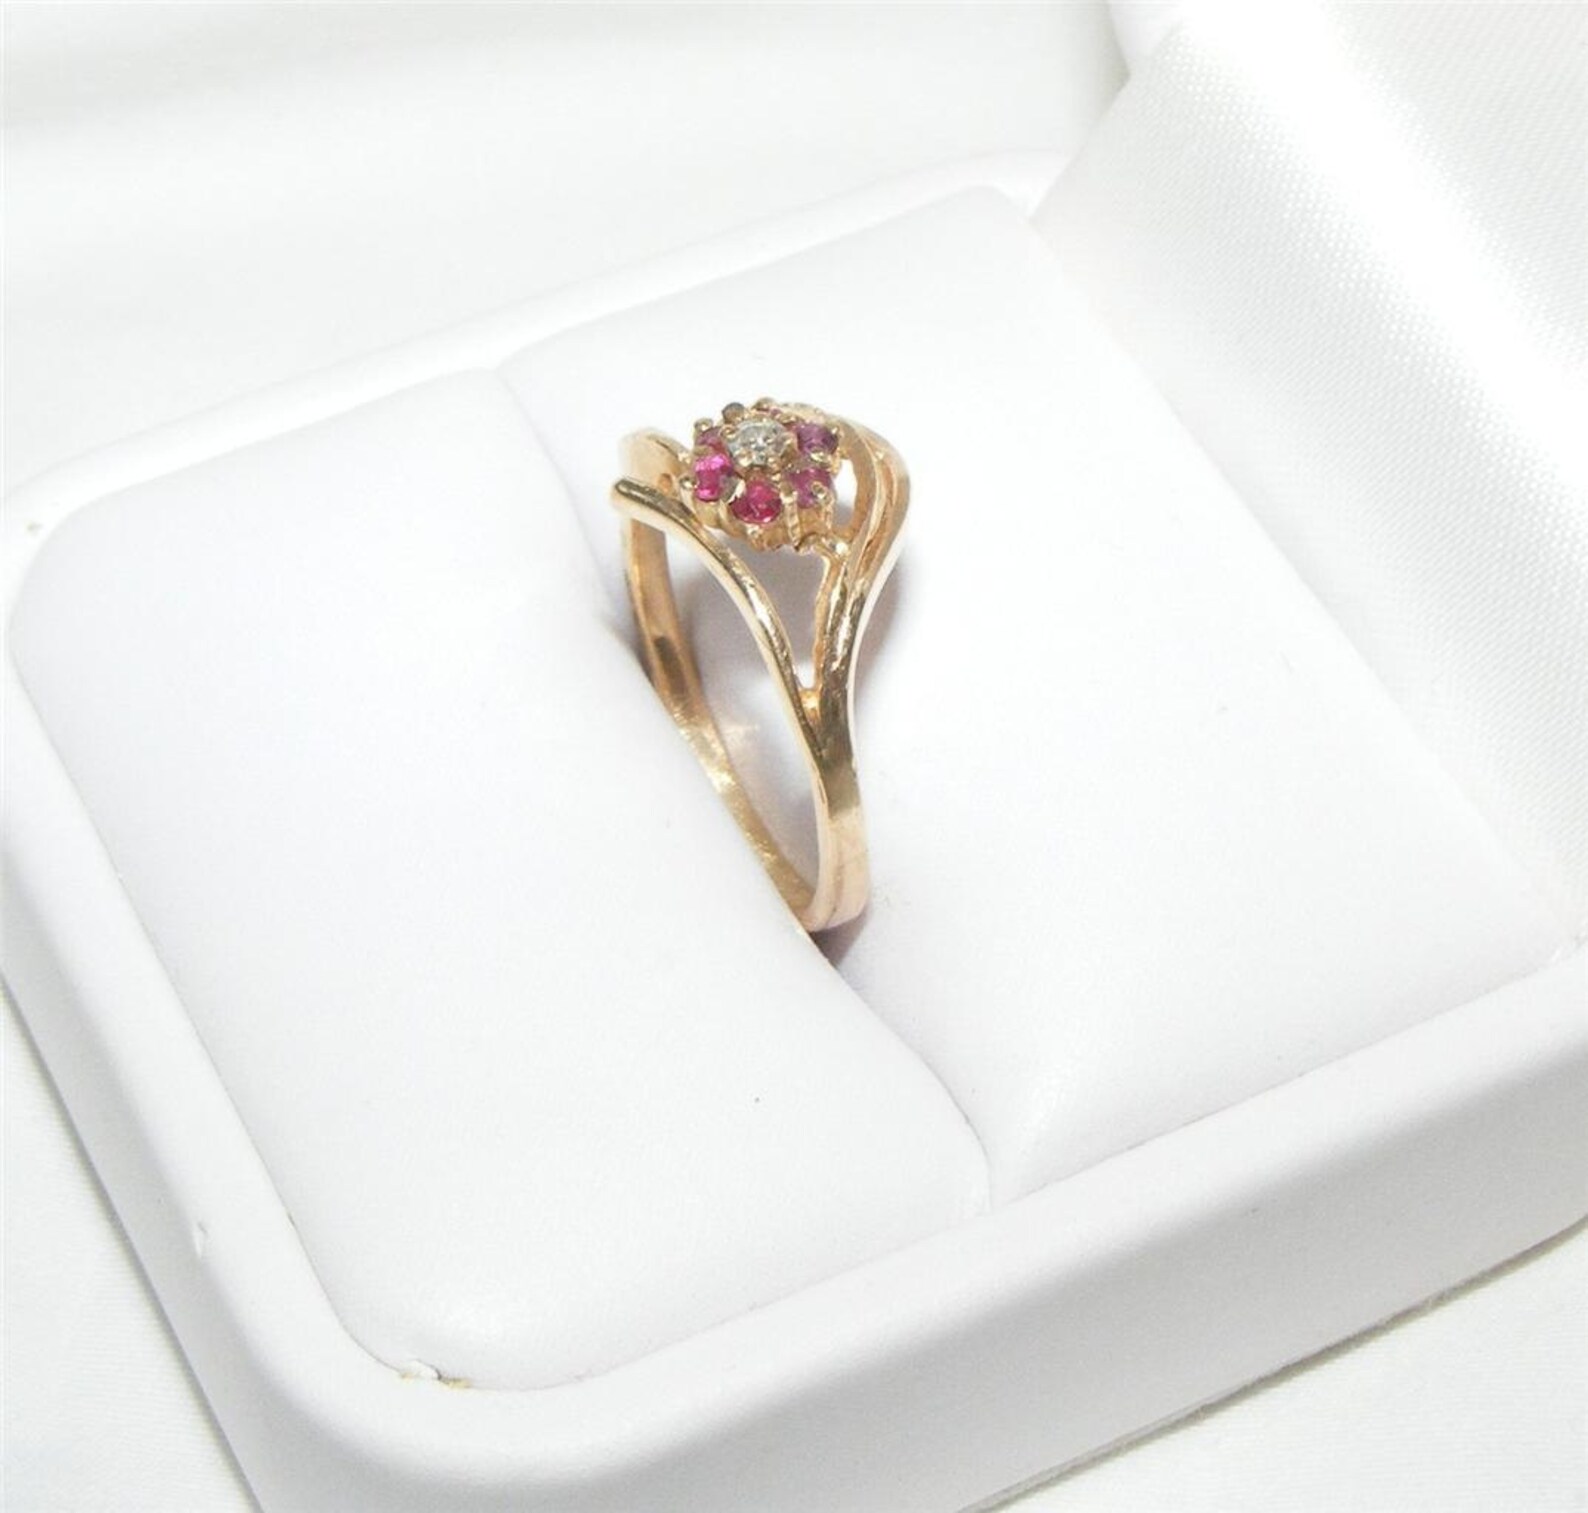 Vintage 14K Gold Ruby and Diamond Ring Forget-me-knot Flower - Etsy